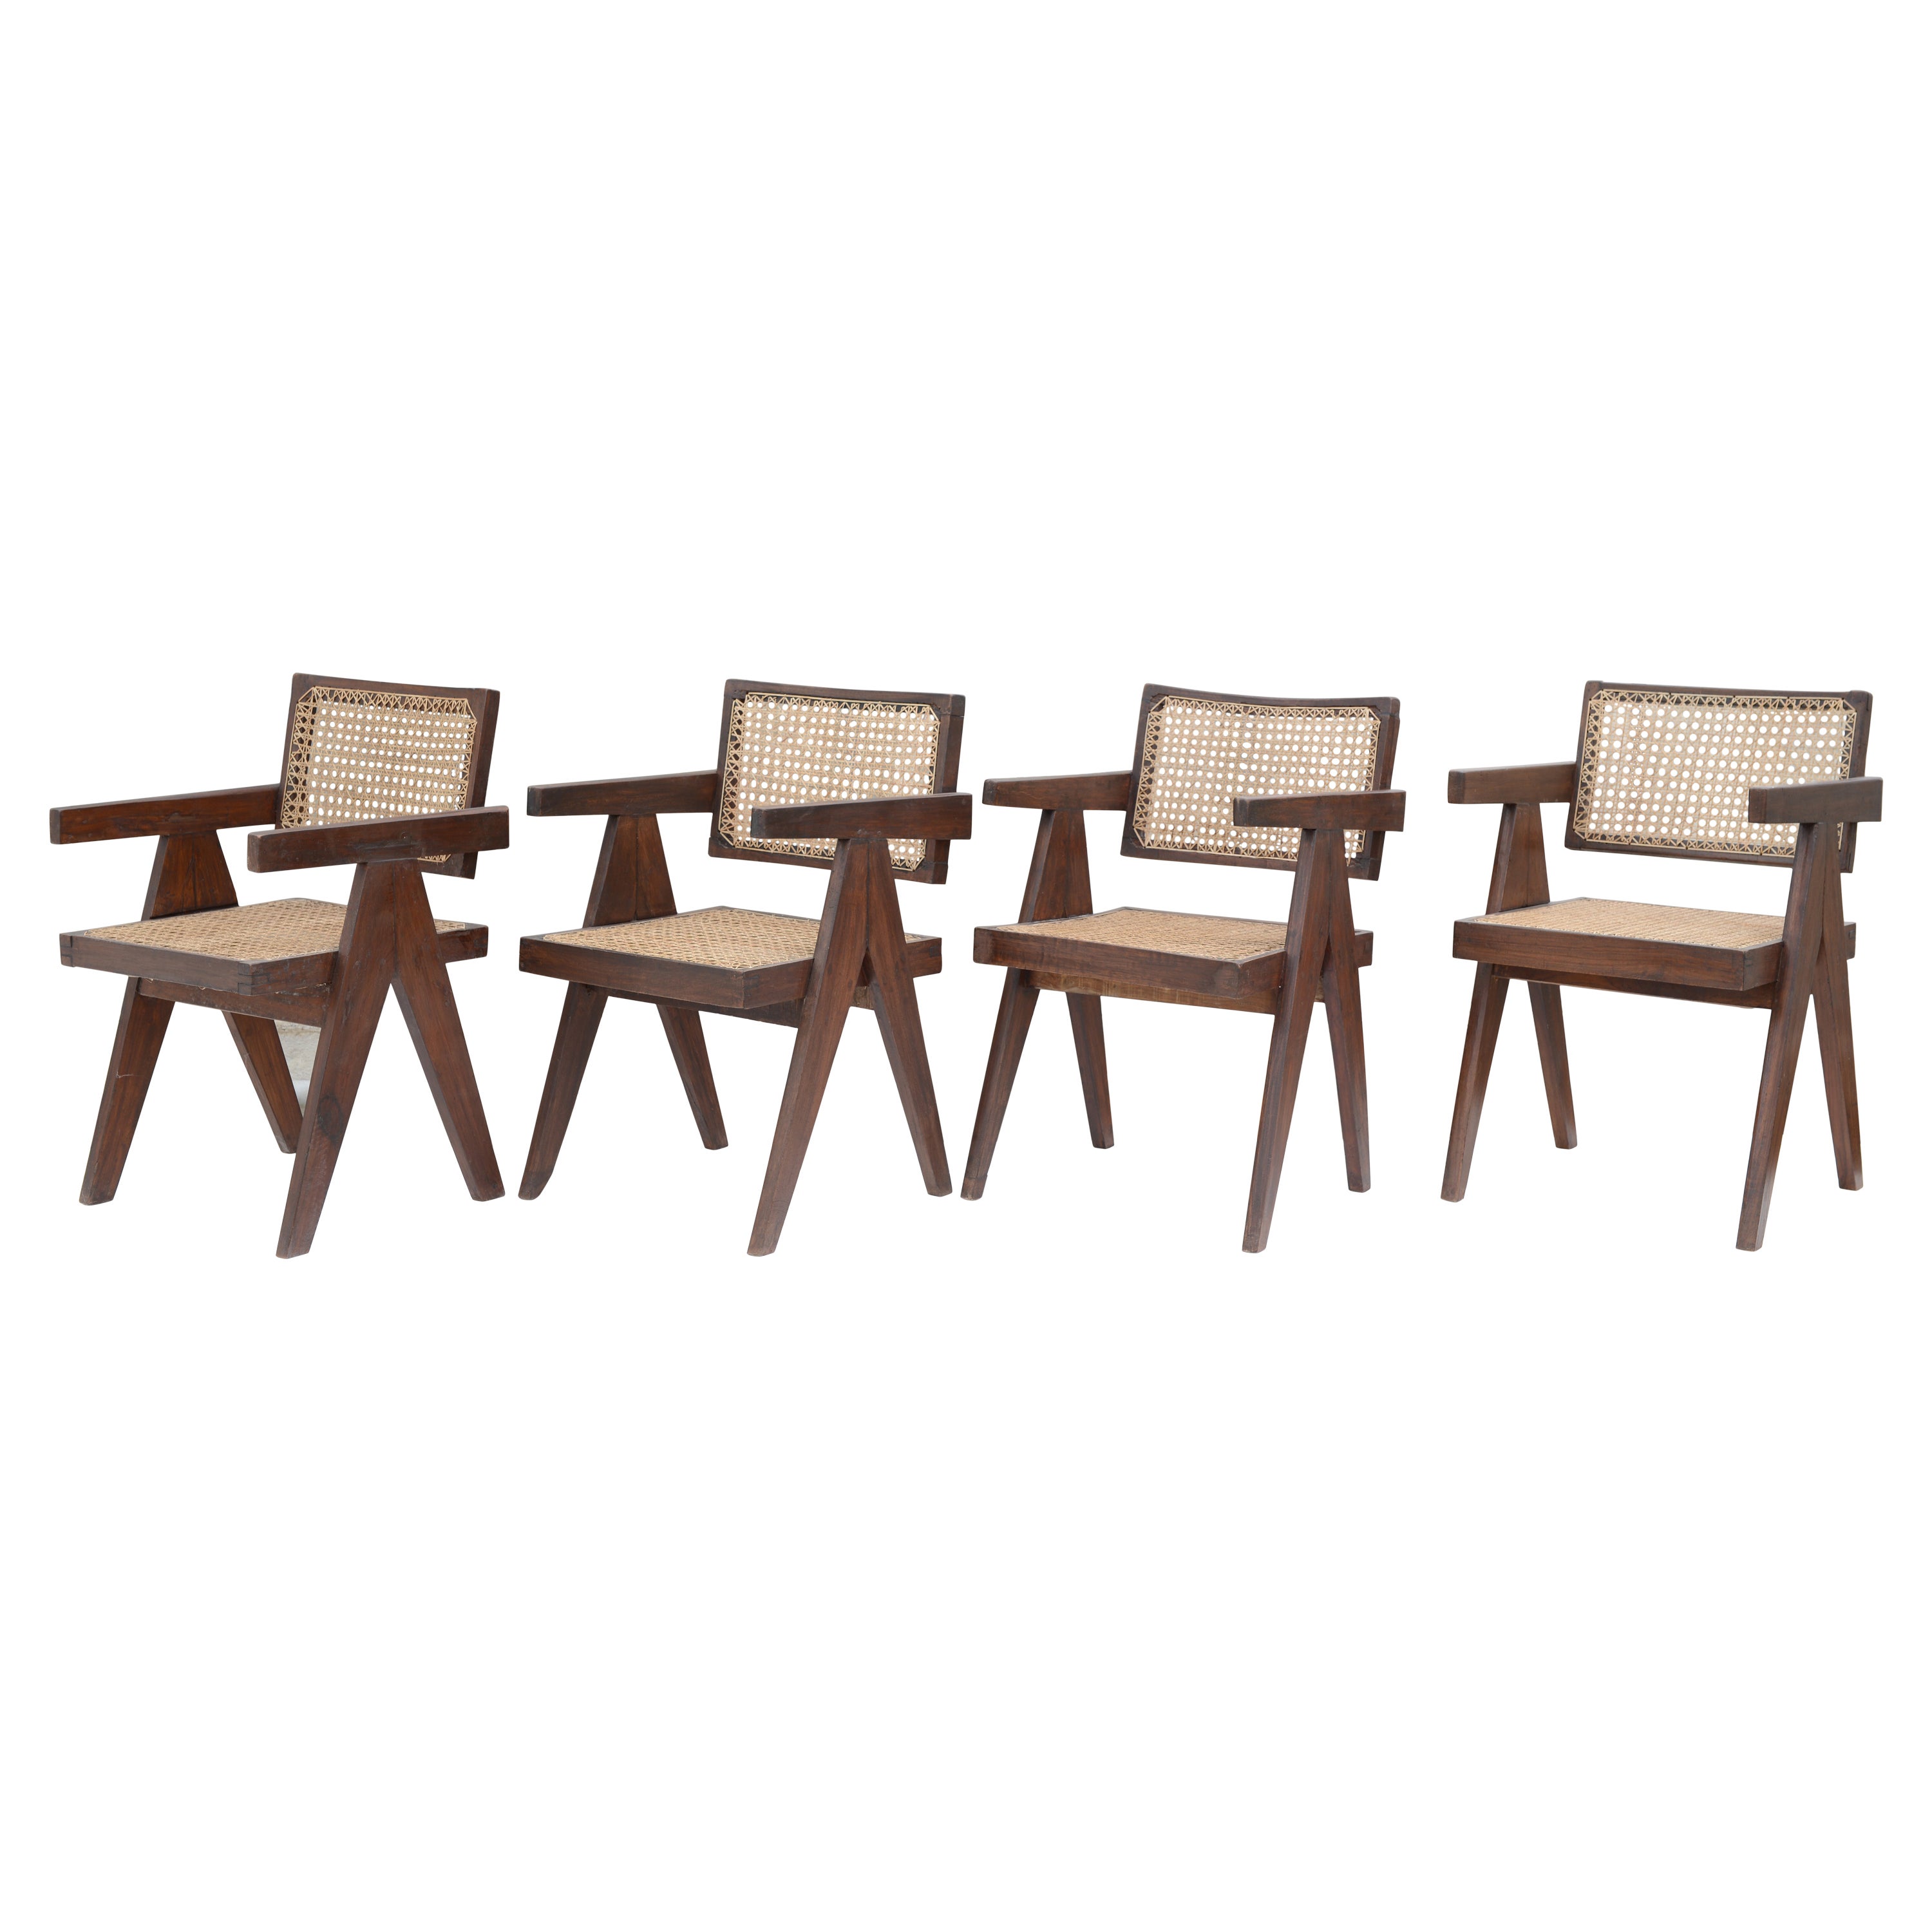 Pierre Jeanneret Set of 4 Chairs / Authentic Mid-Century Modern PJ-SI-28-A